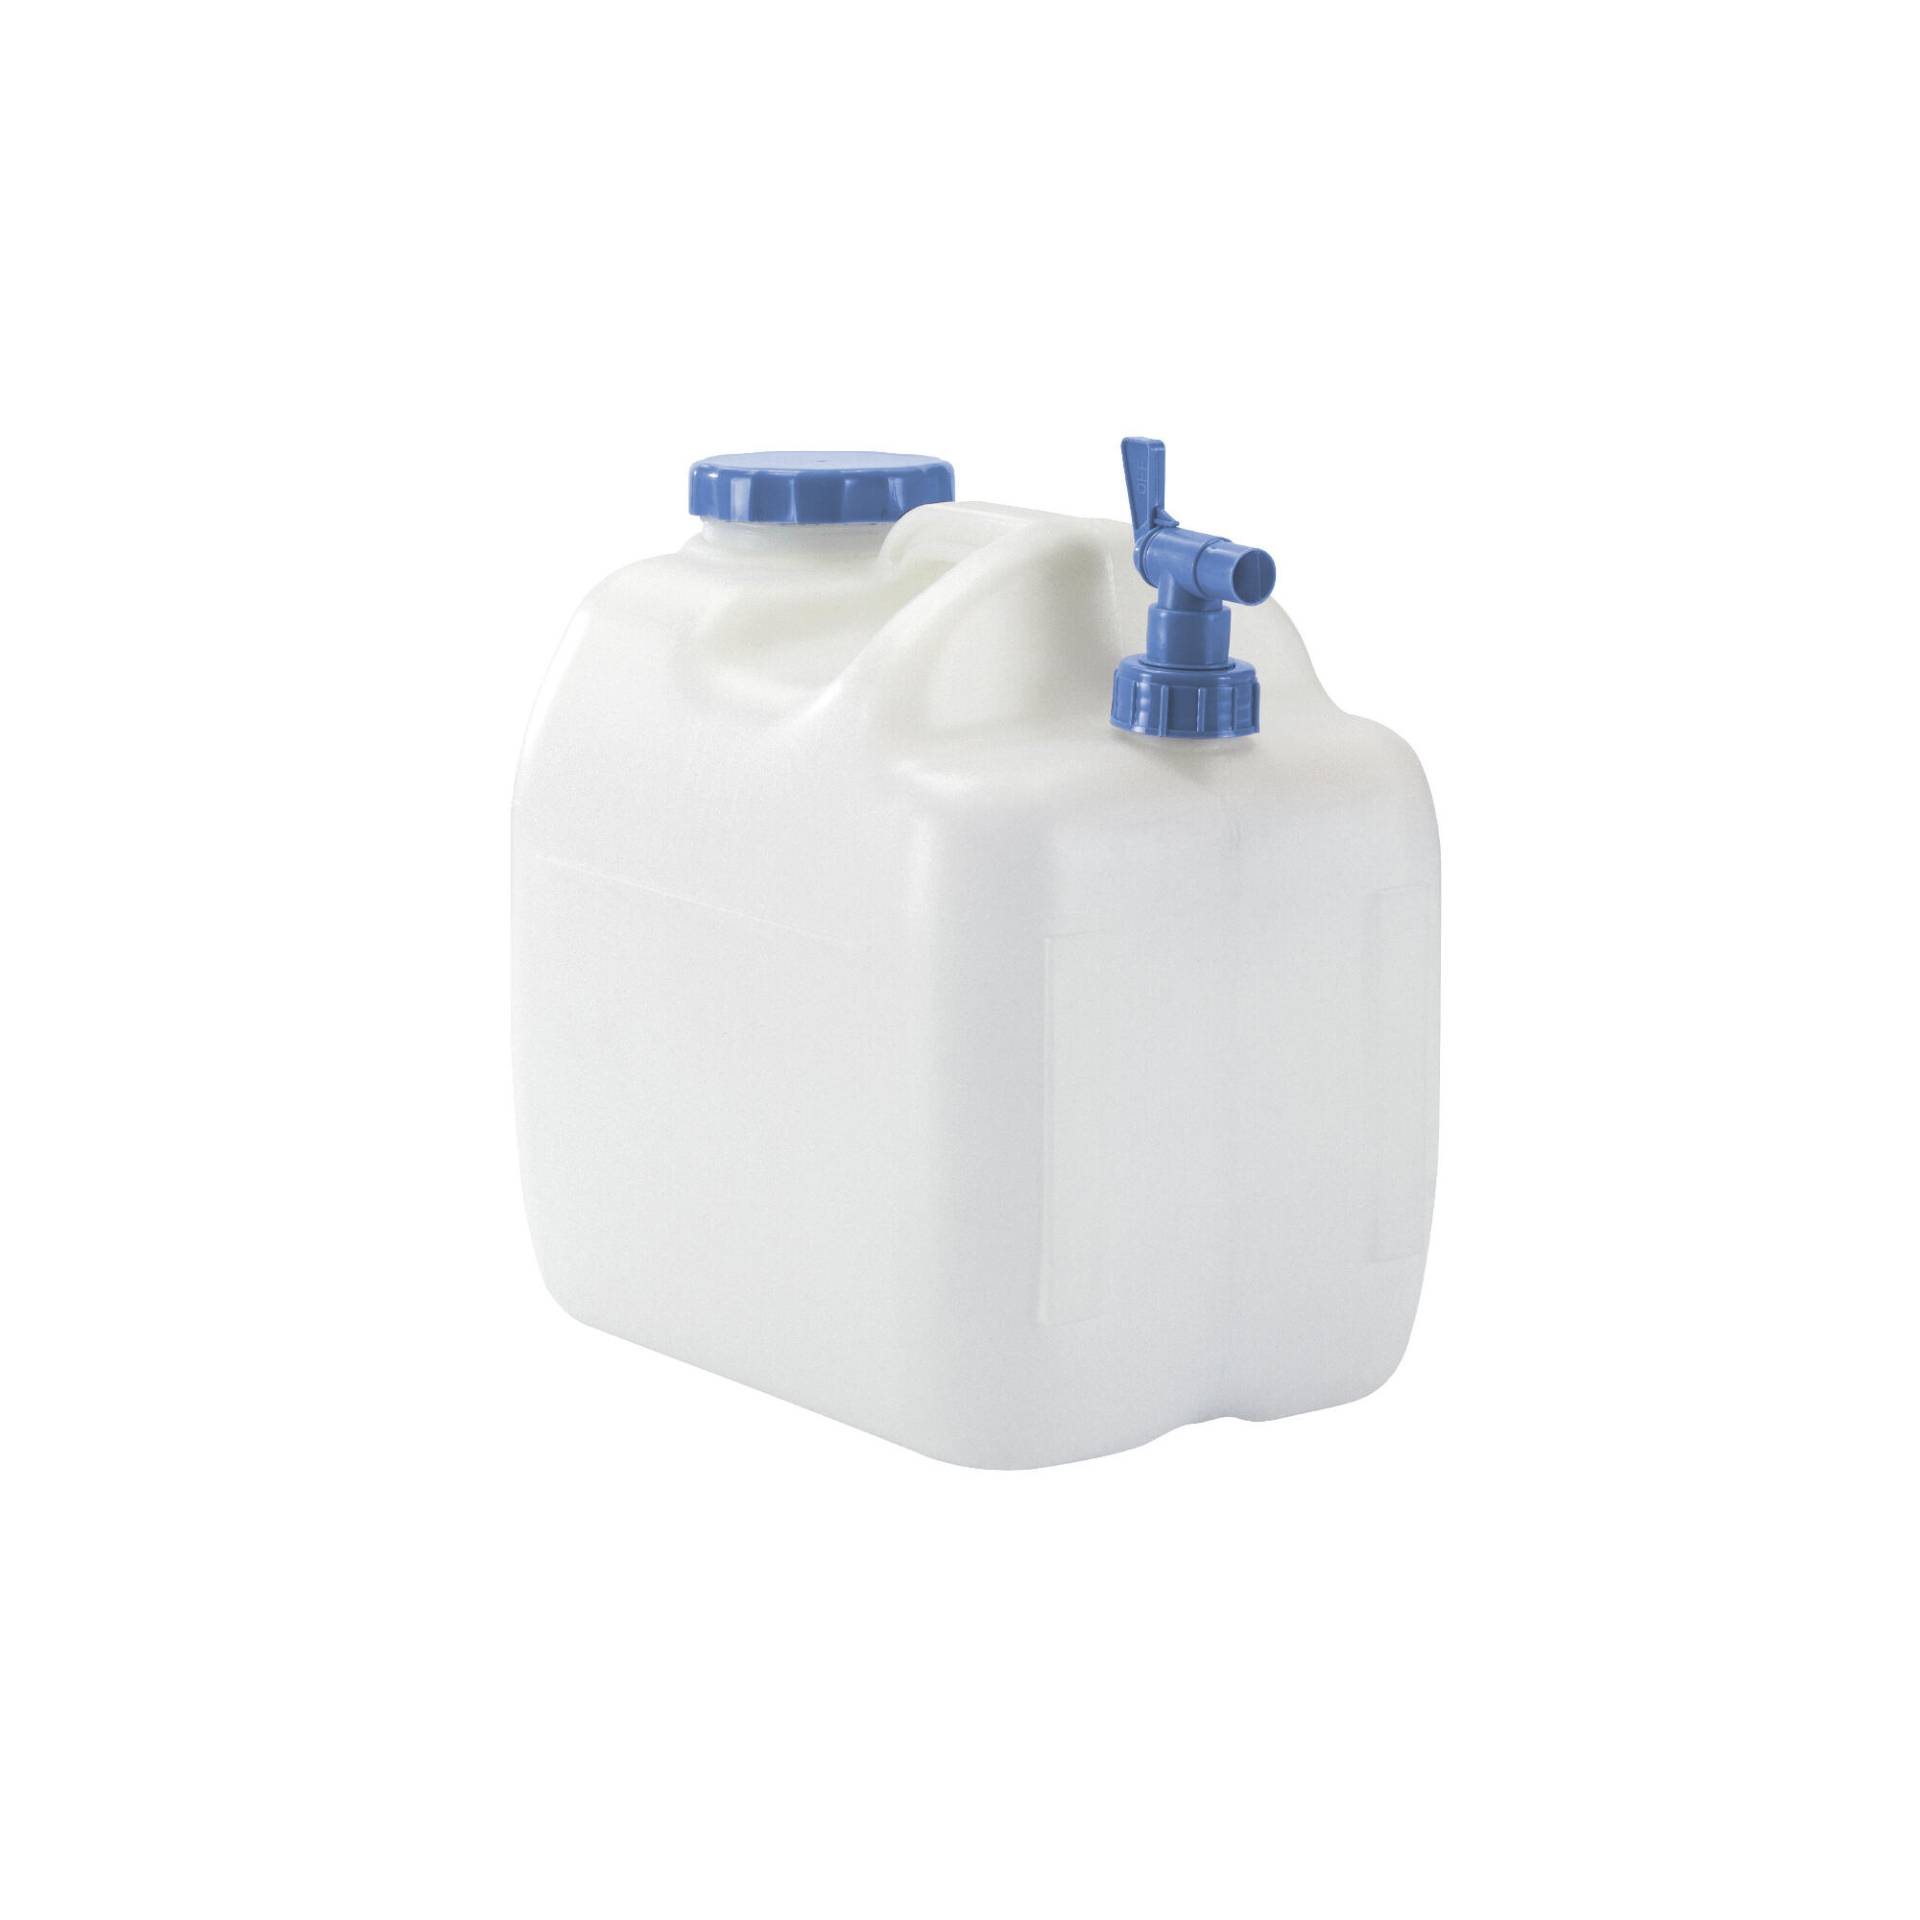 Wasserkanister Camping 23 L - Easy Camp Jerrycan 23 L von Easy Camp